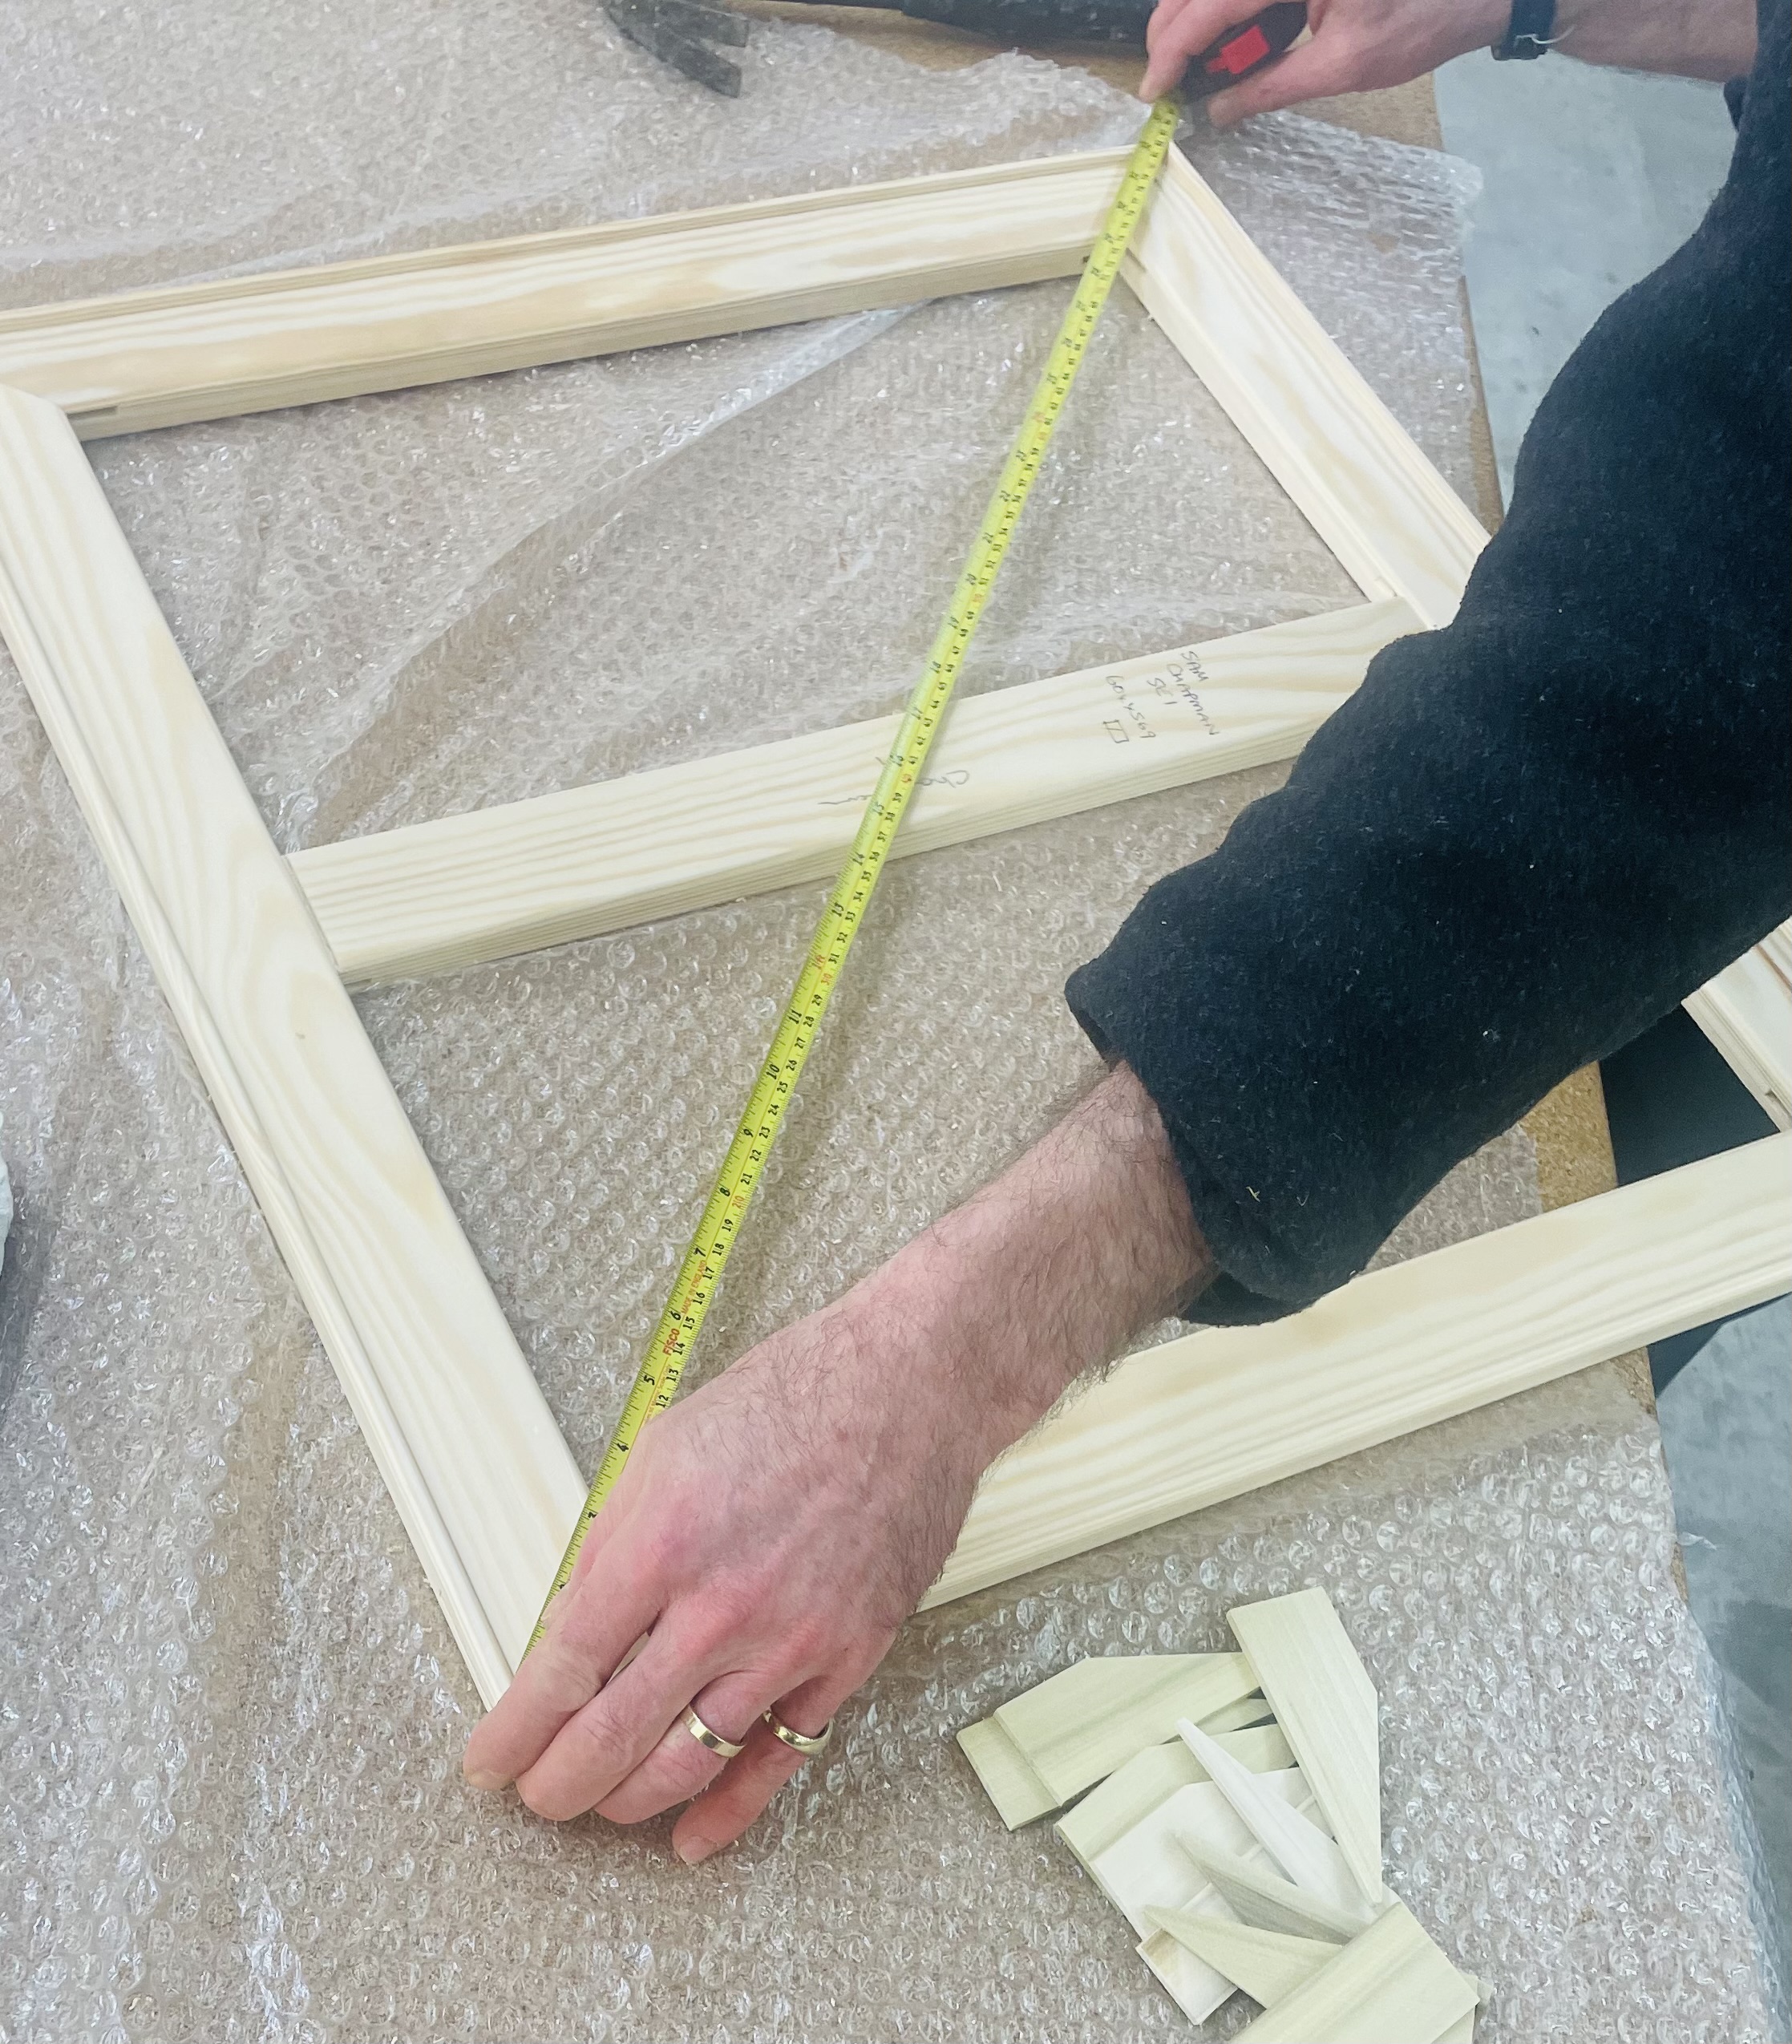 SE1 Picture Frames use custom made slotted stretchers